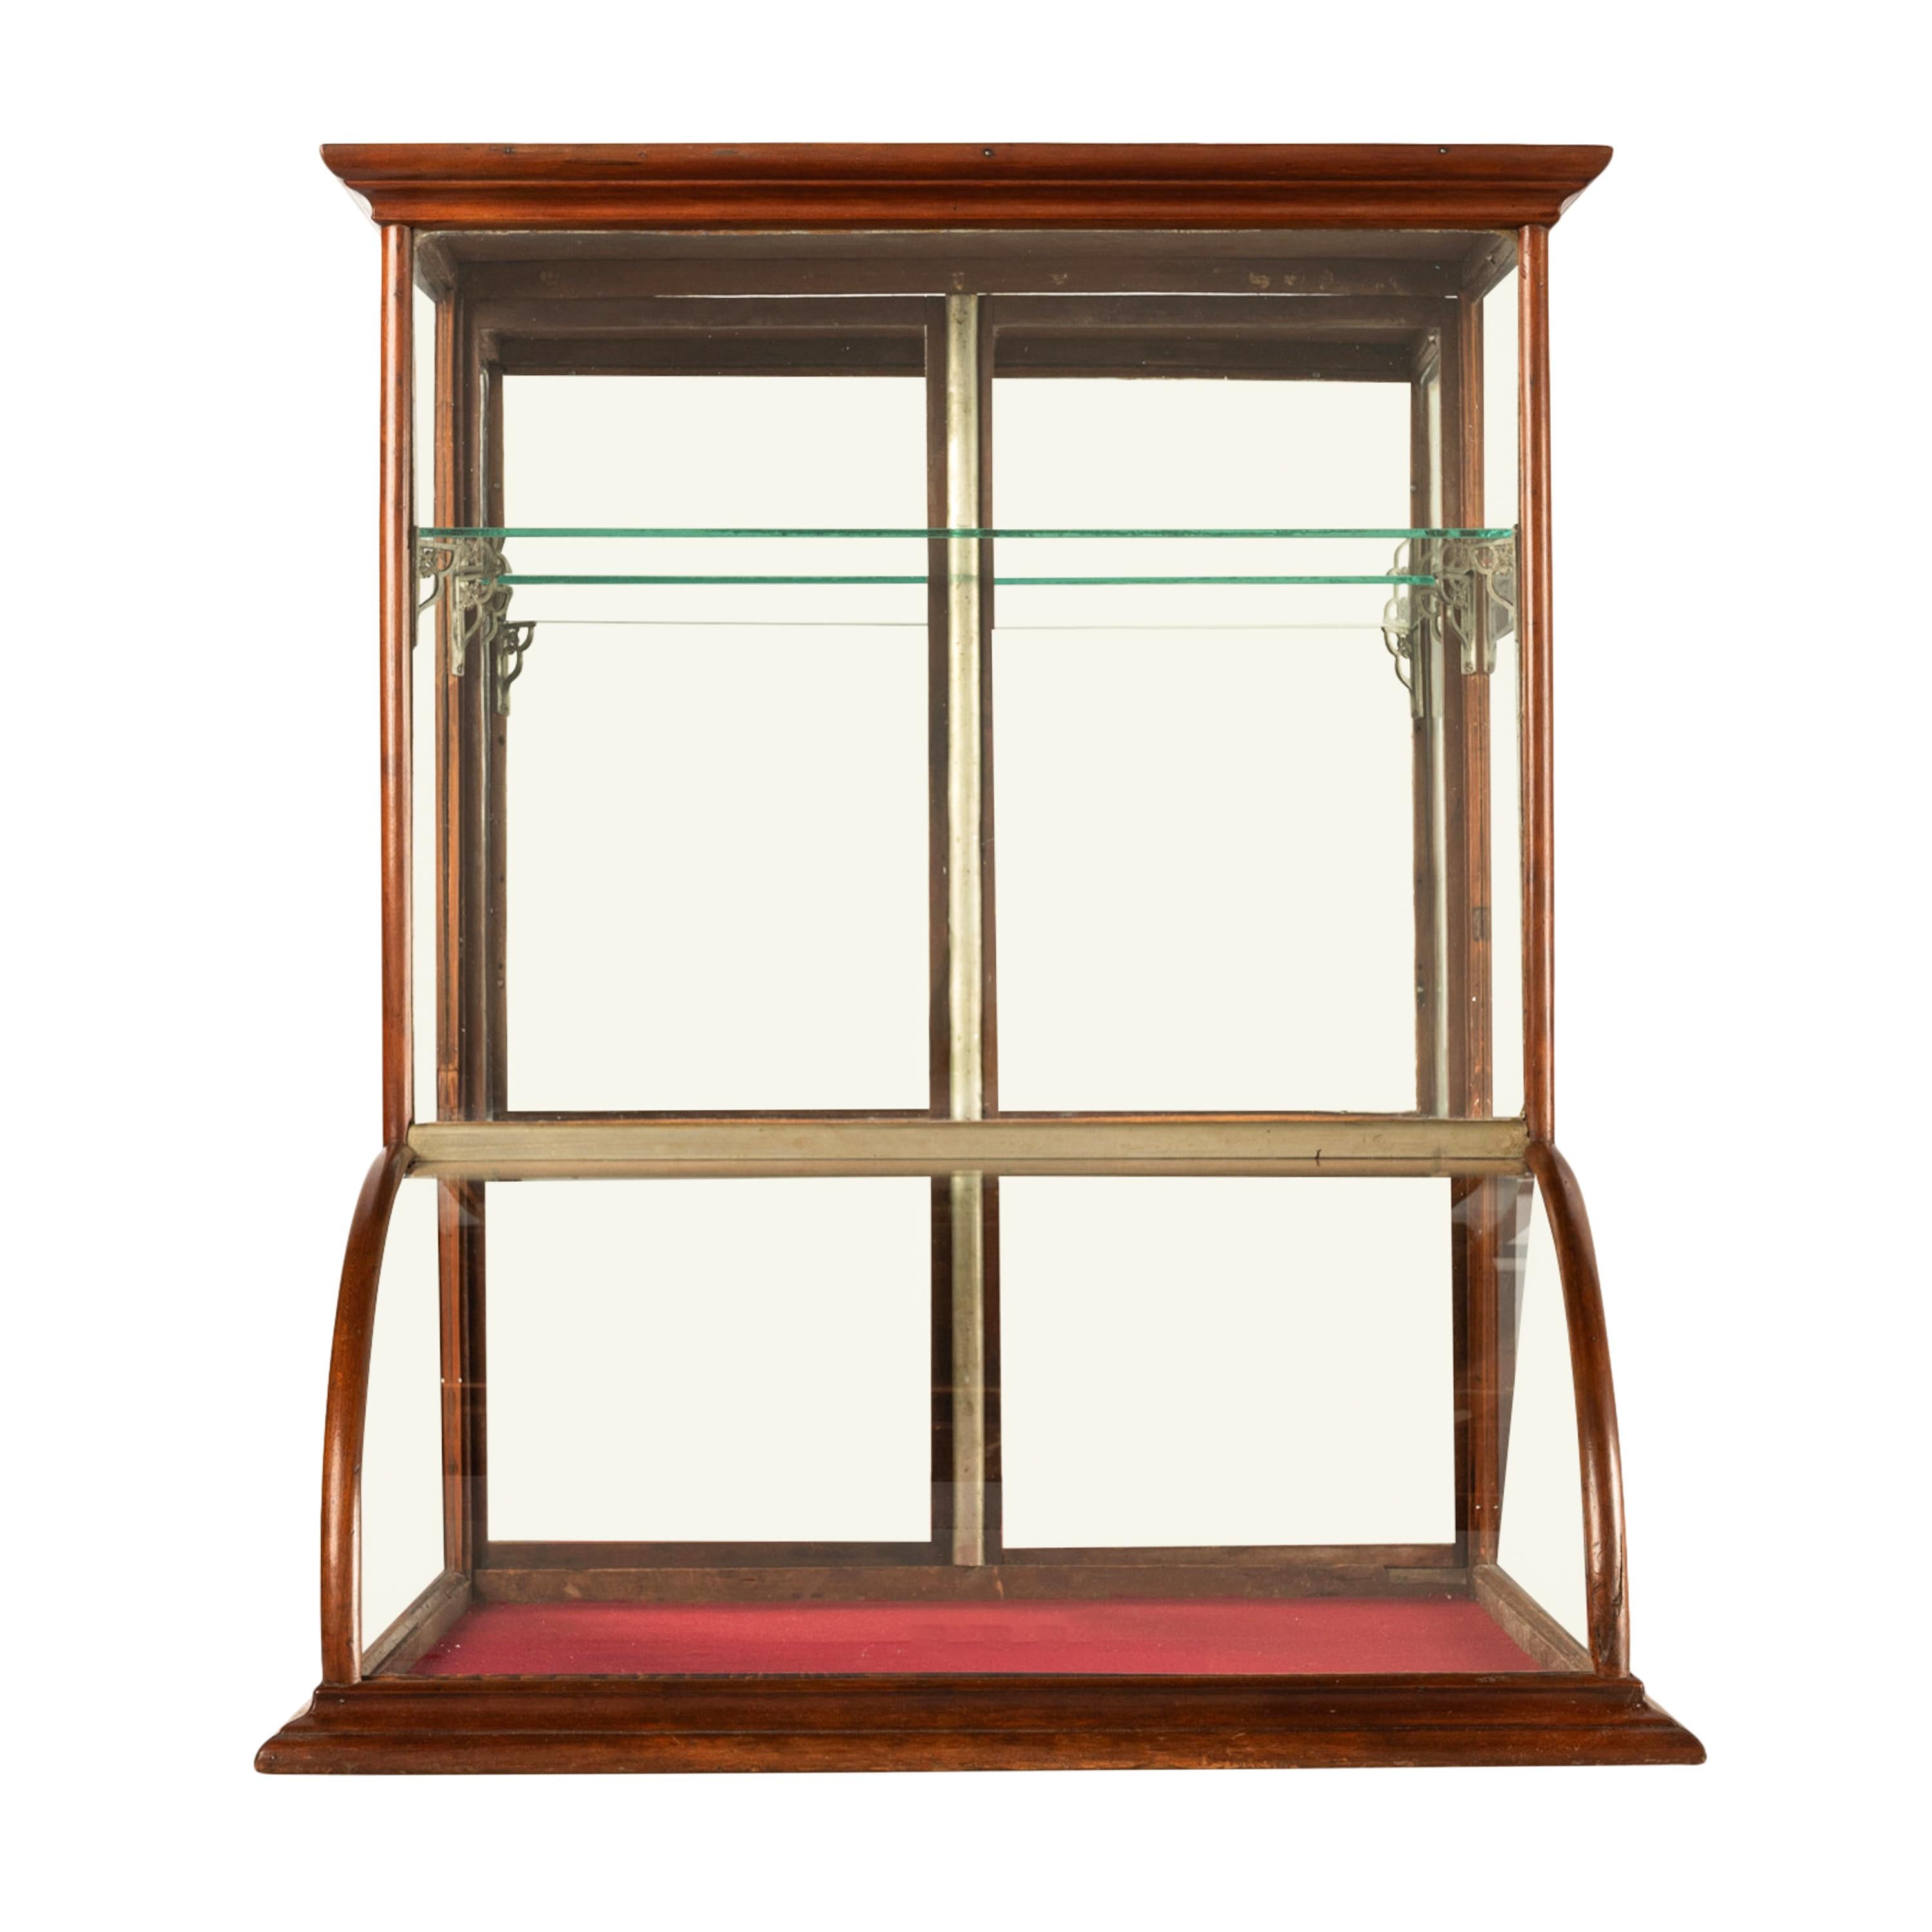 A very good antique American oak and curved glass mercantile counter top display case, circa 1900.
The display case having a stepped crown & a pair of doors to the rear with the original locking latches, to the interior are two glass shelves, the